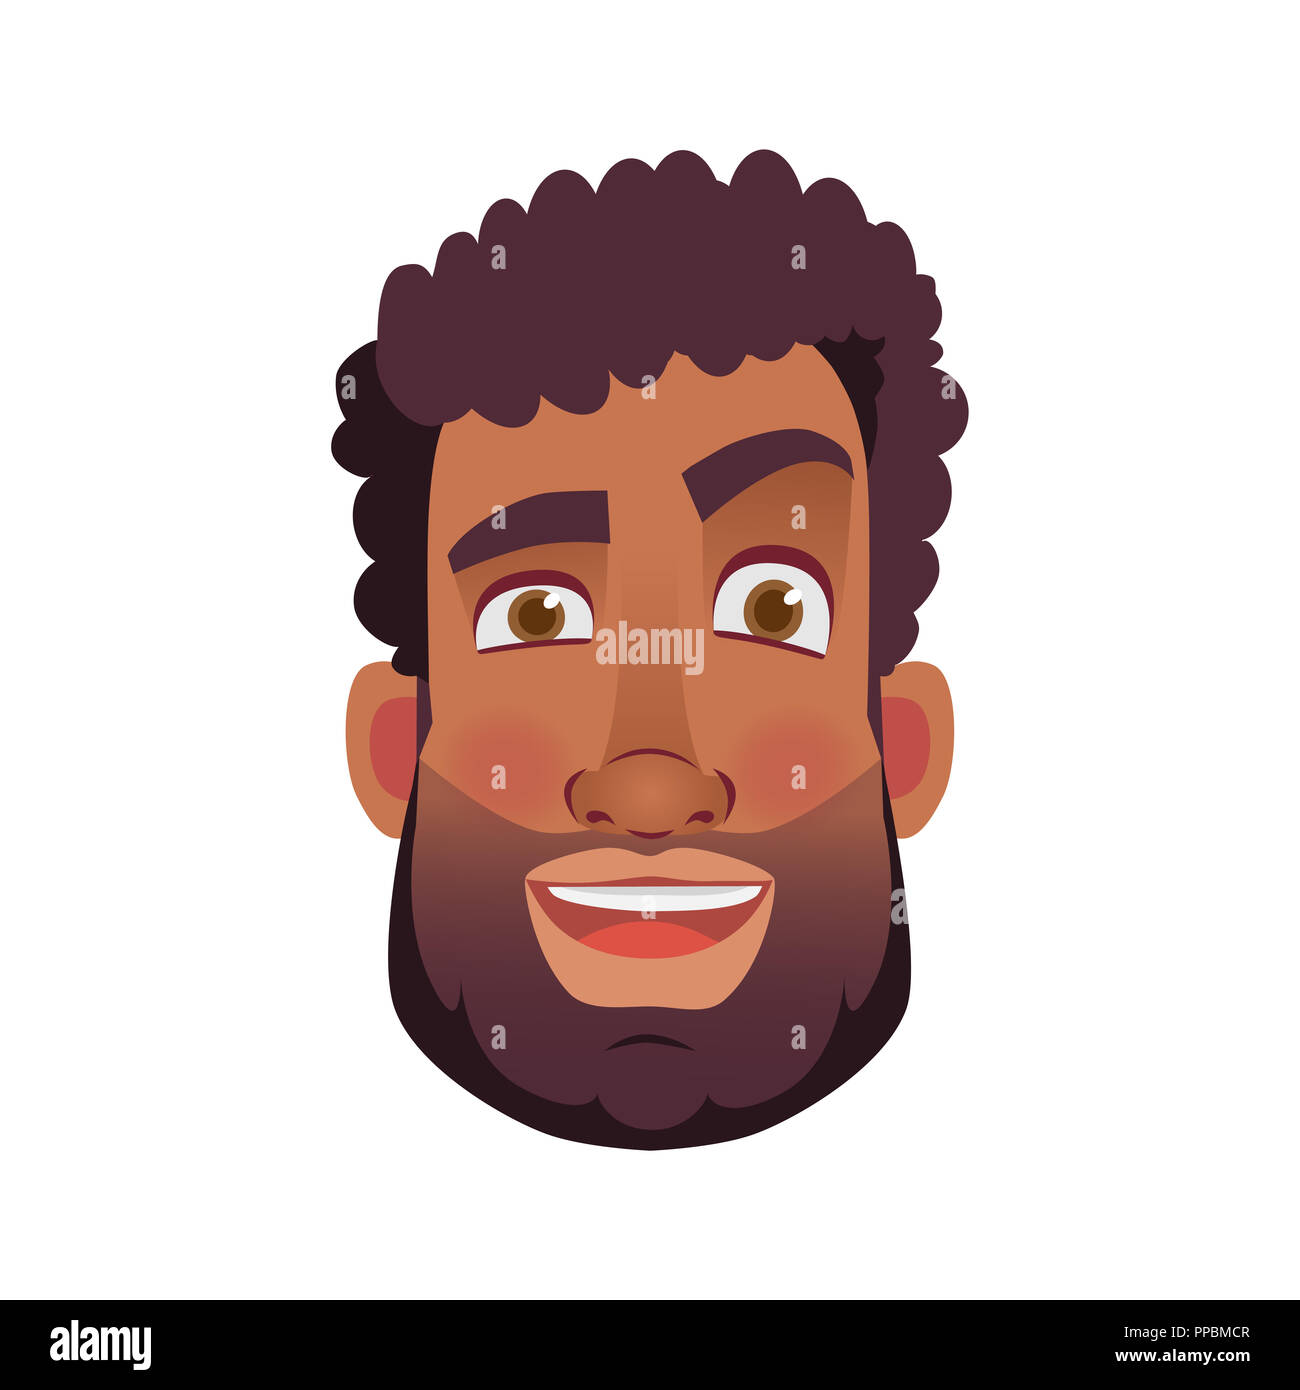 African american man icon. Face of African man illustrations. Stock Photo